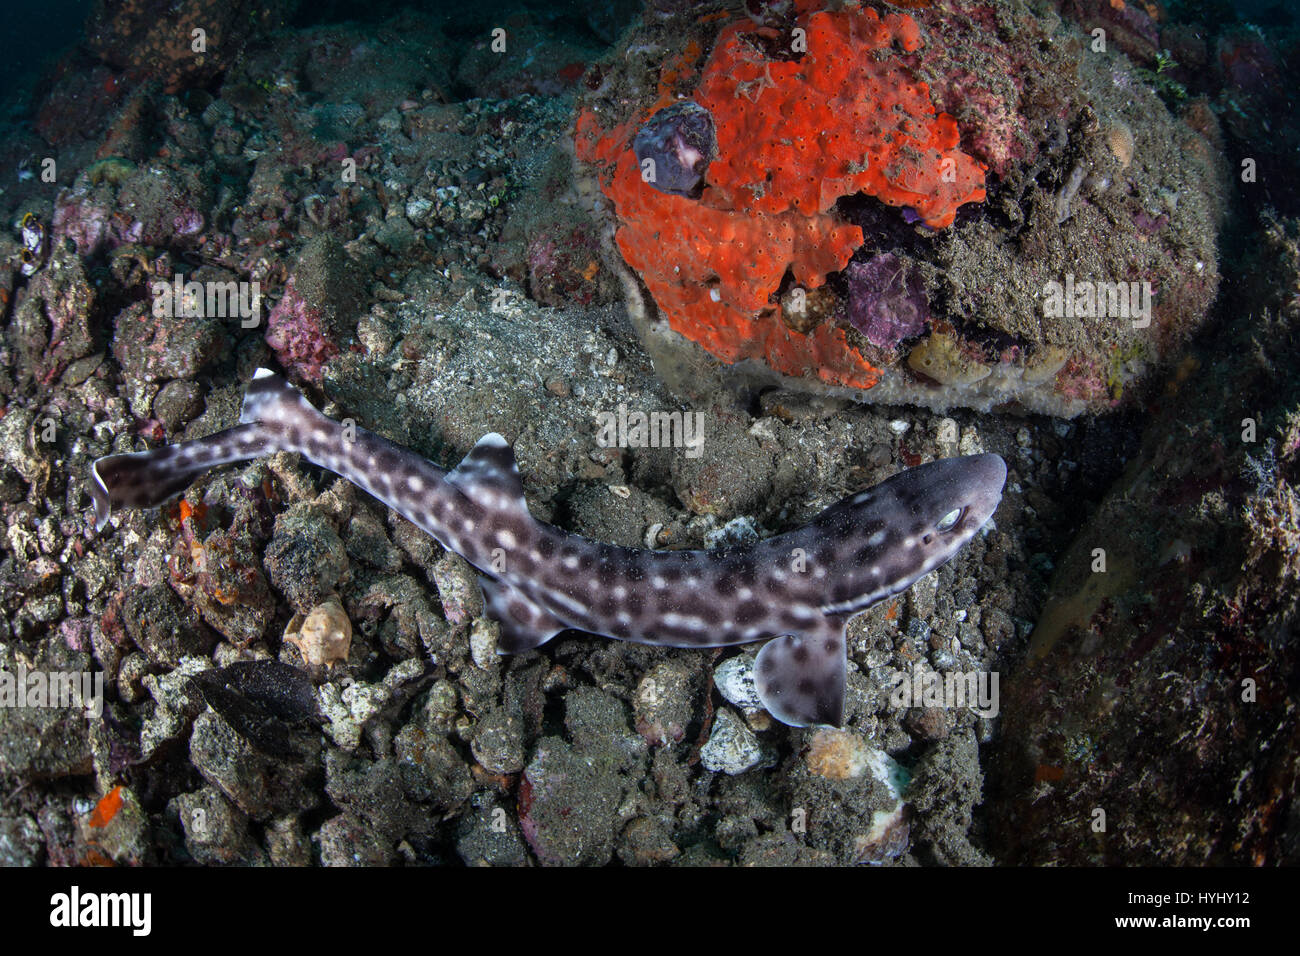 A rare Coral cat shark crawls across the seafloor in Lembeh Strait, Indonesia. Stock Photo